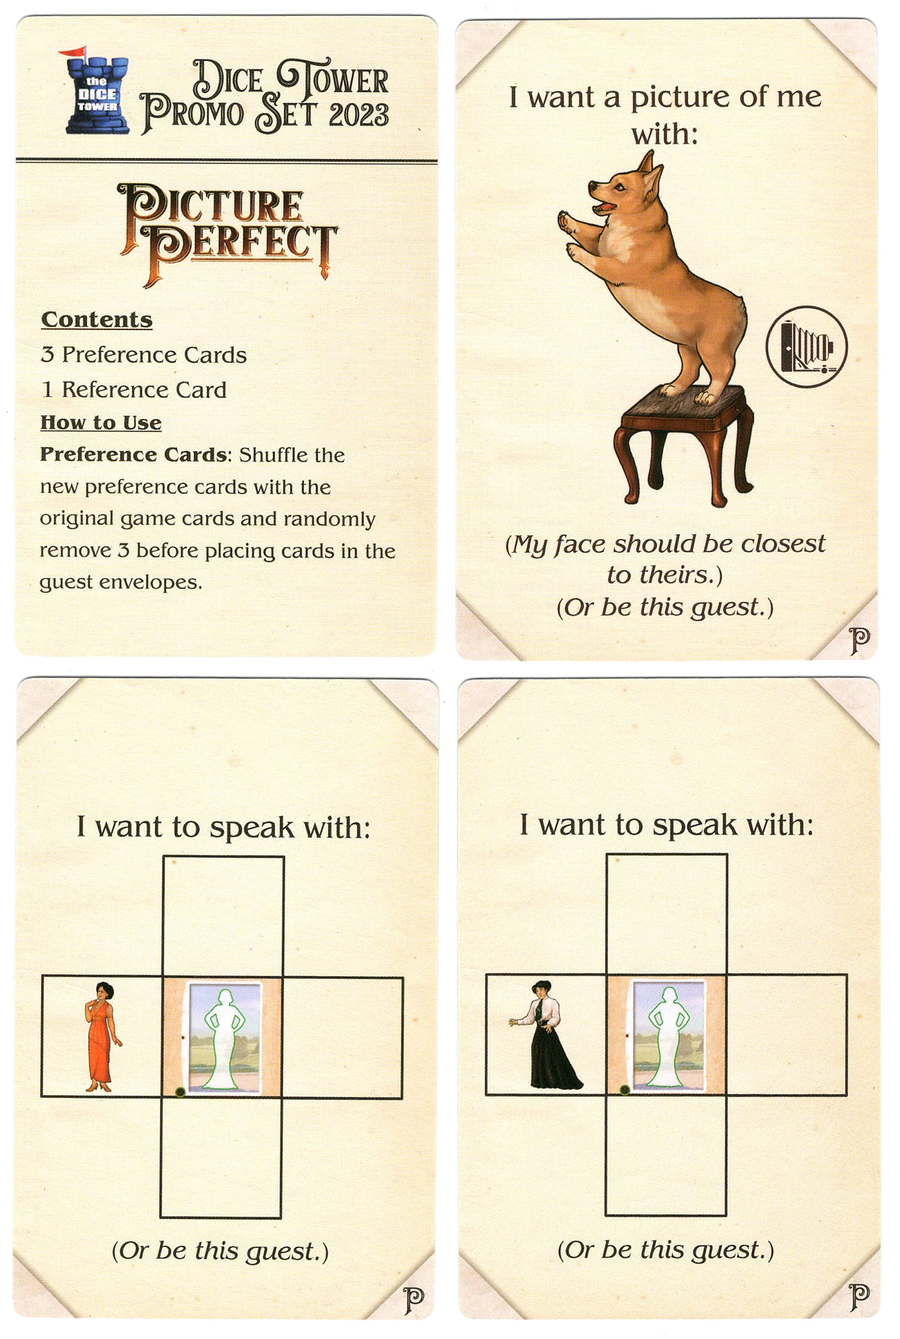 A set of four cards arranged in a 2x2 square on a white background, for use with the board game Picture Perfect. The top left card is an instruction sheet for the other three cards. The top right card has an illustration of a dog on its hind legs balancing on top of a stool. The bottom two cards each have a diagram of five squares and an illustration of a female figure inside one square.